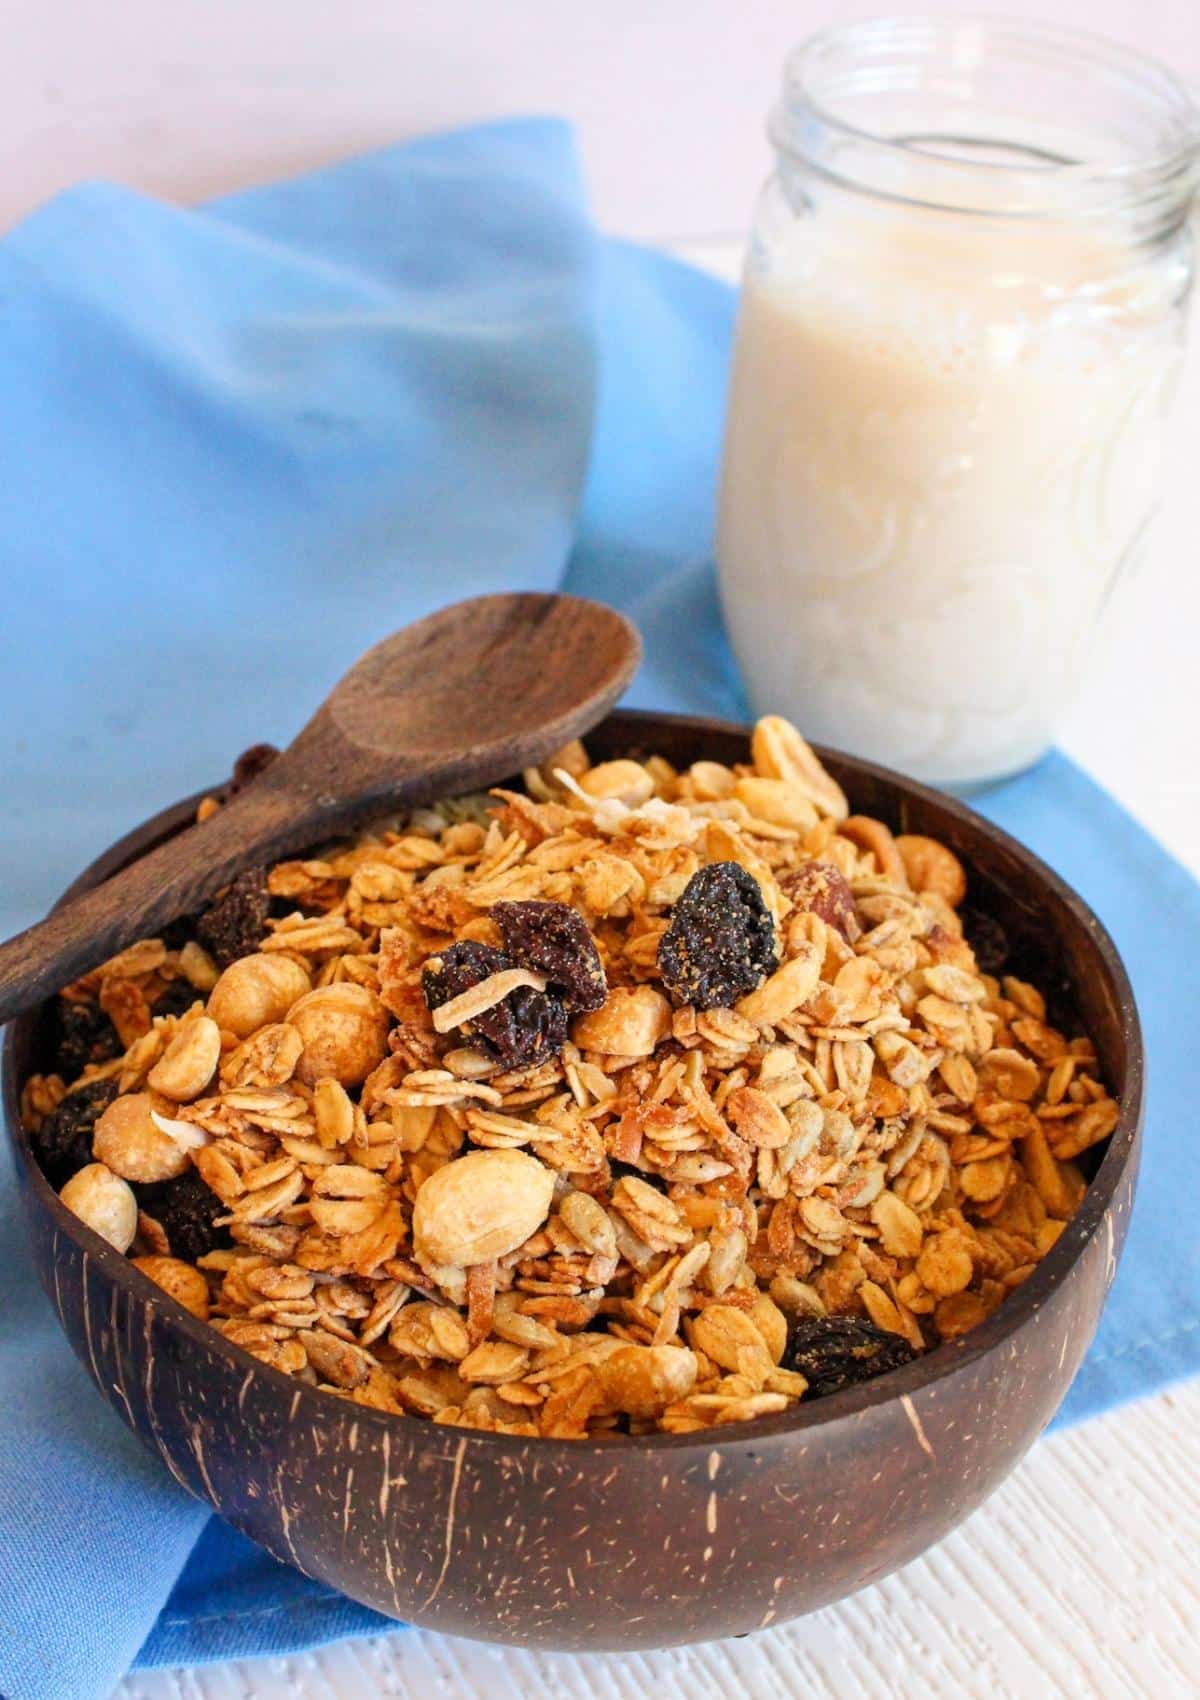 Vegan granola in a bowl with a wooden spoon and glass of milk